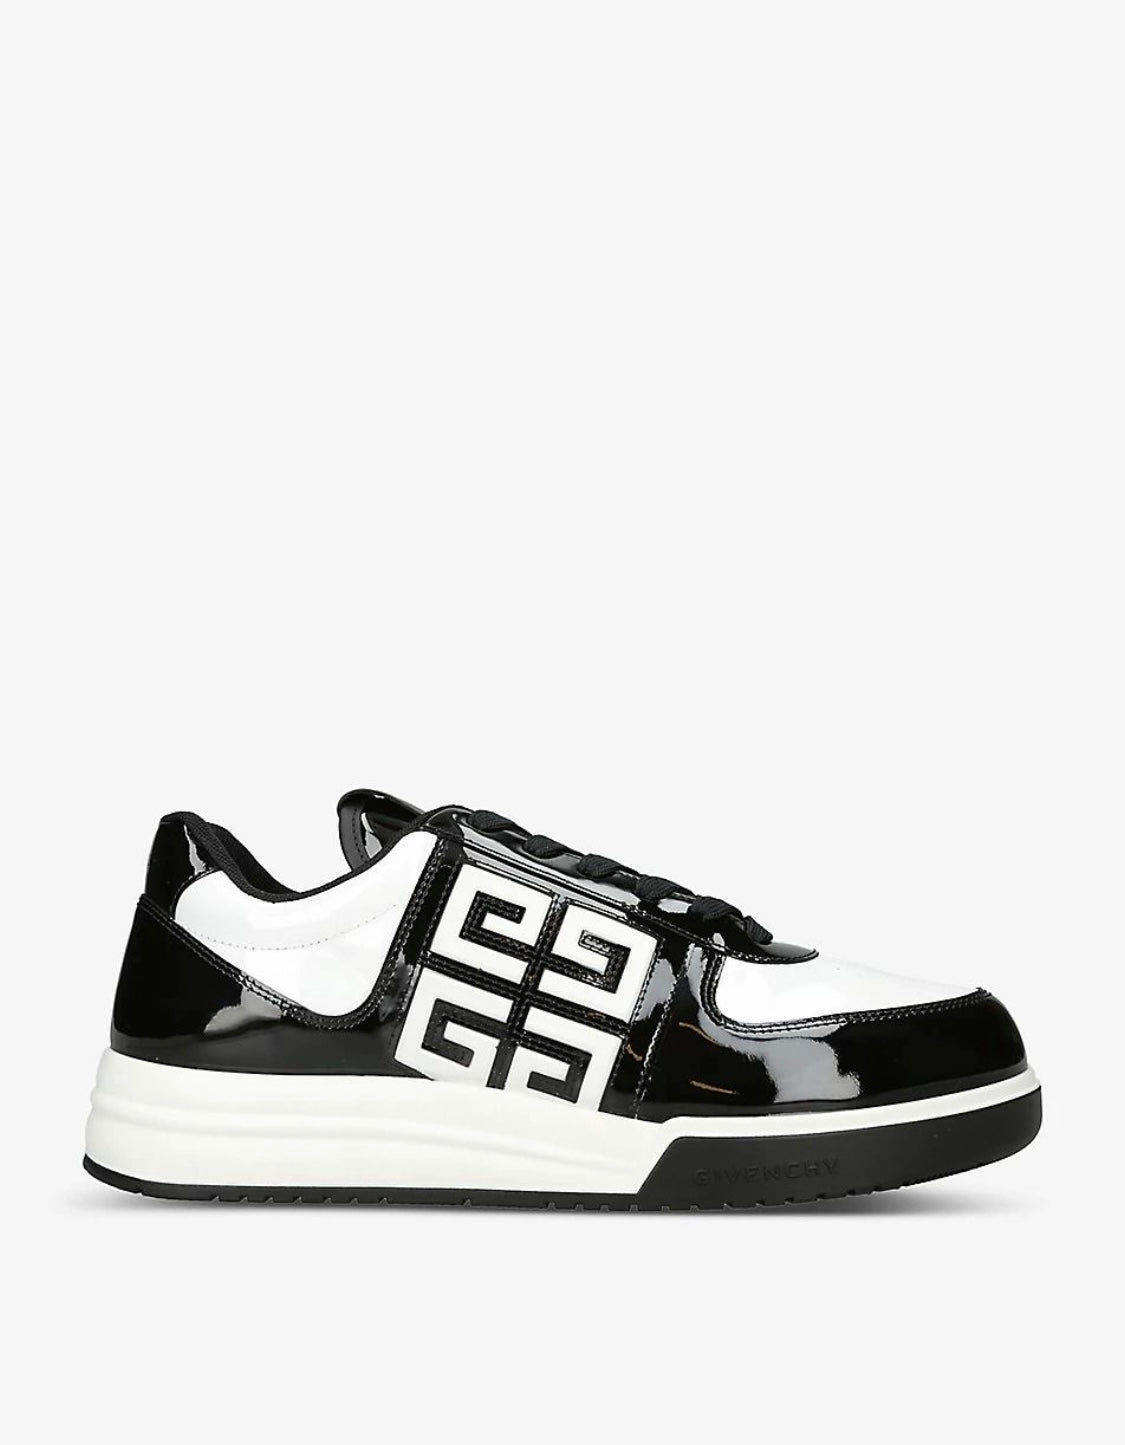 Champion Givenchy G4 Low Black and White (EU 44)